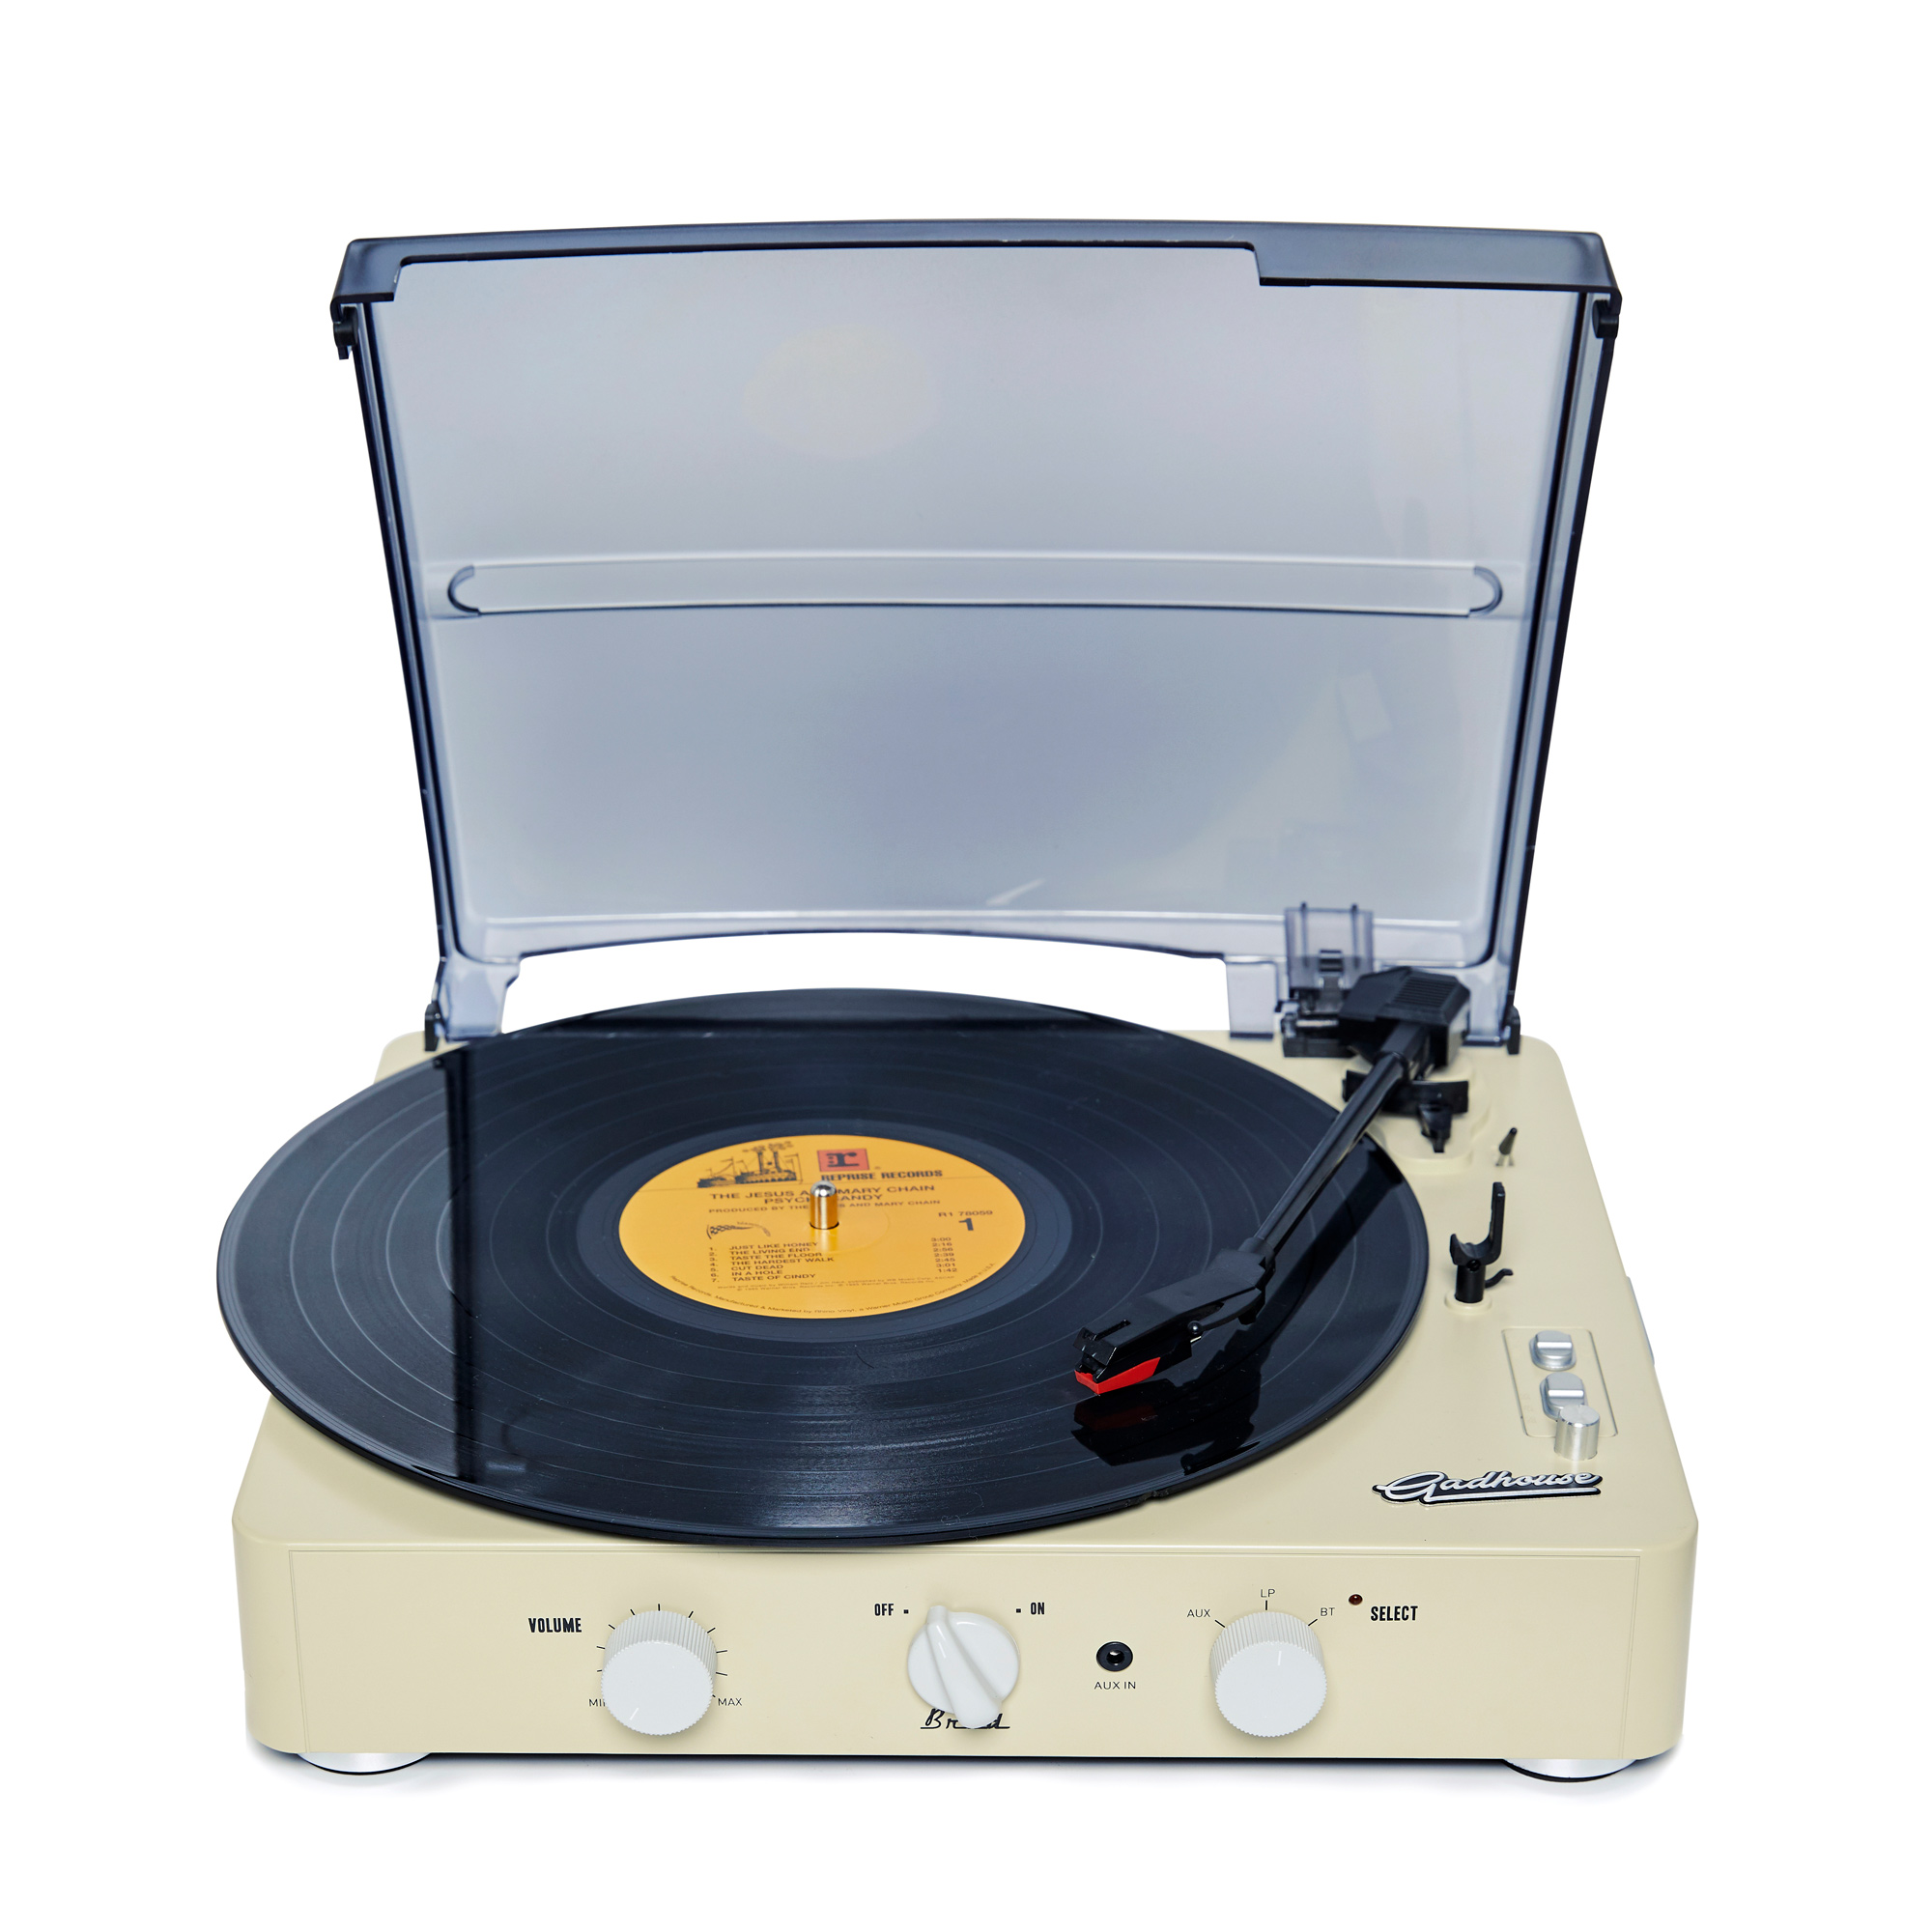 Gadhouse Brad Vintage Record Player 3-Speed Turntable Built in